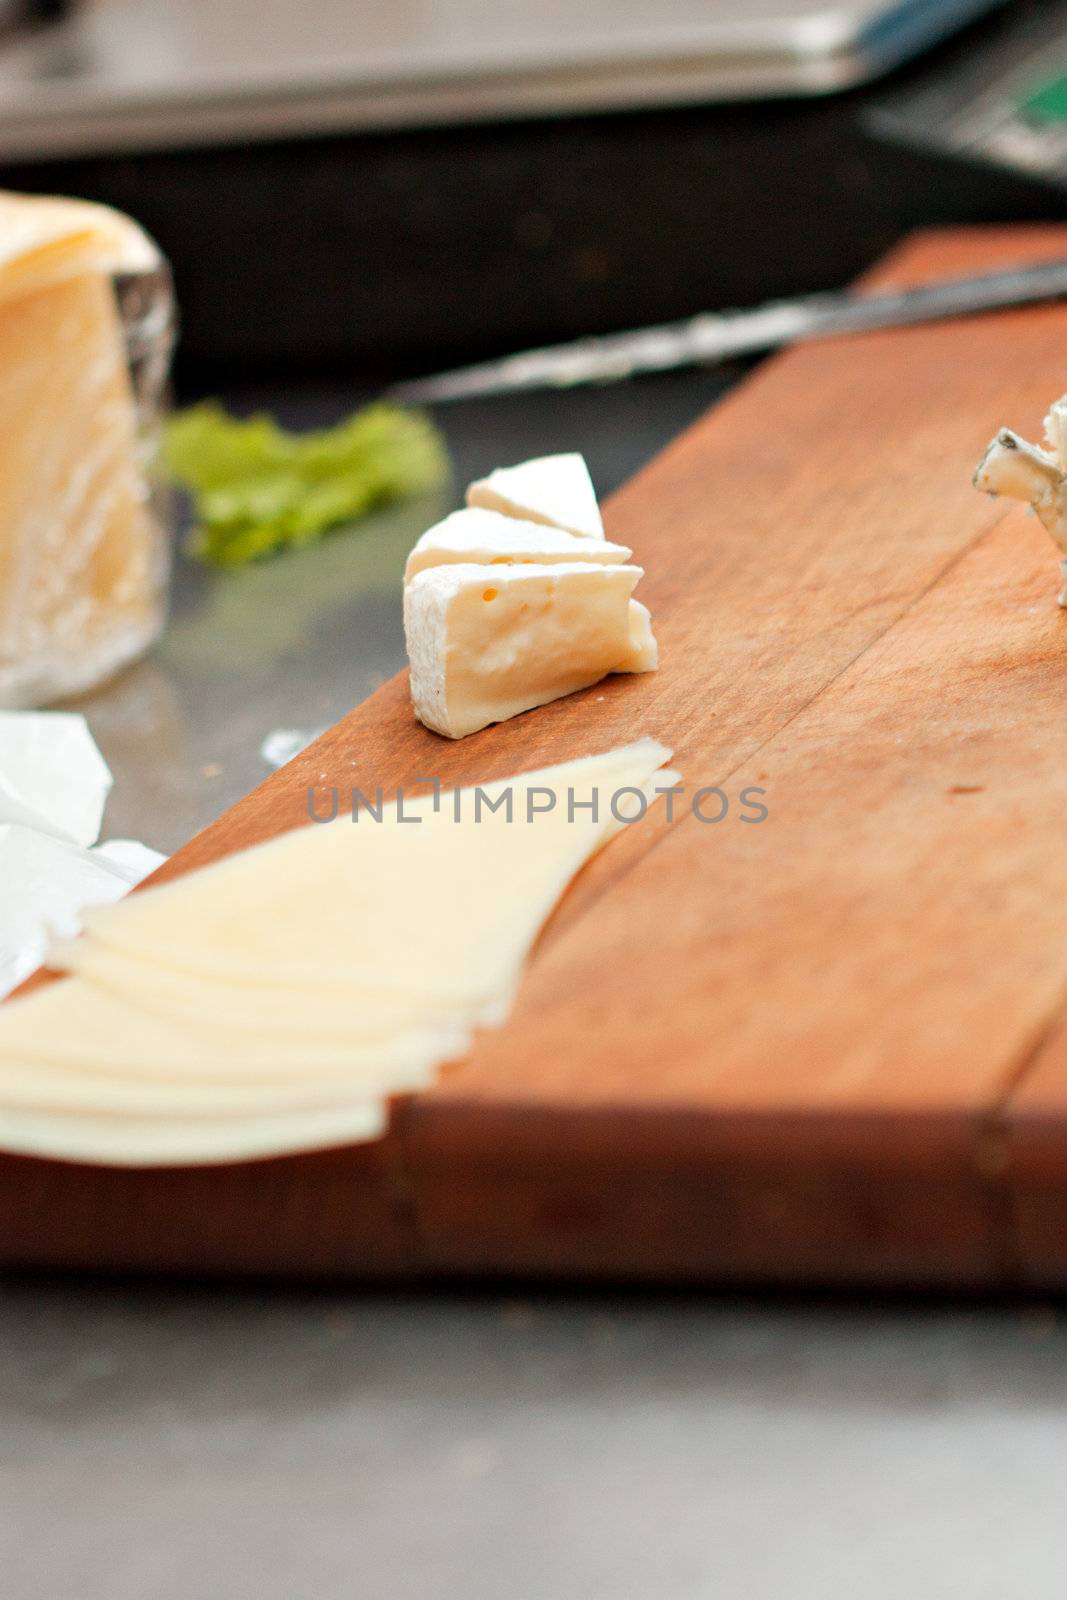 pieces of cheese on a wooden tray by nigerfoxy